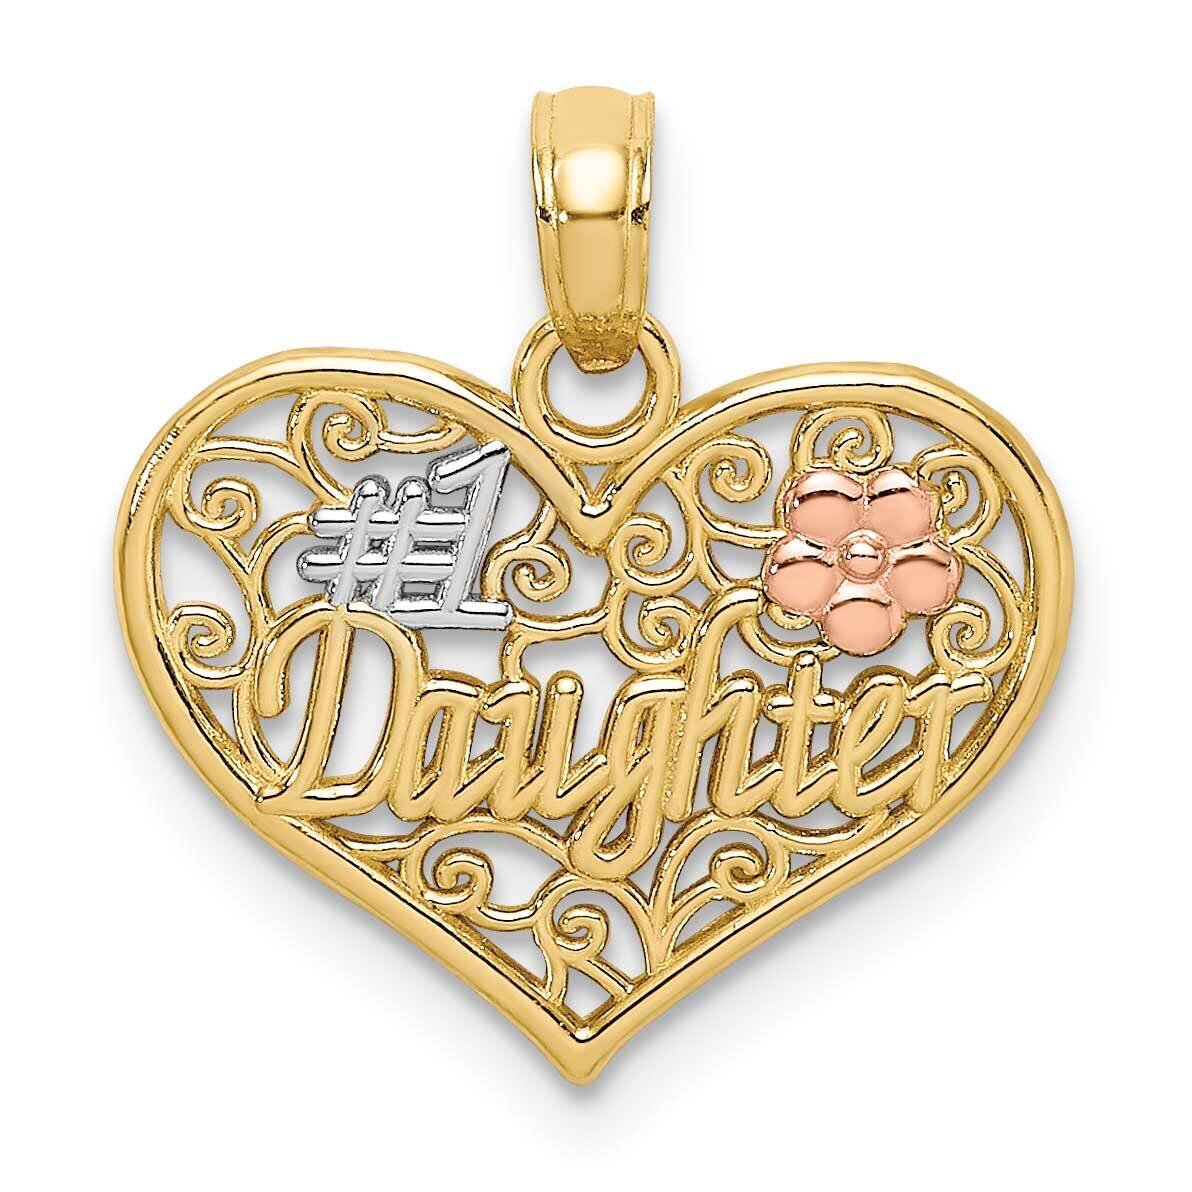 #1 Daughter In Heart with Flowers Charm 14k Tri-Color Gold K9558